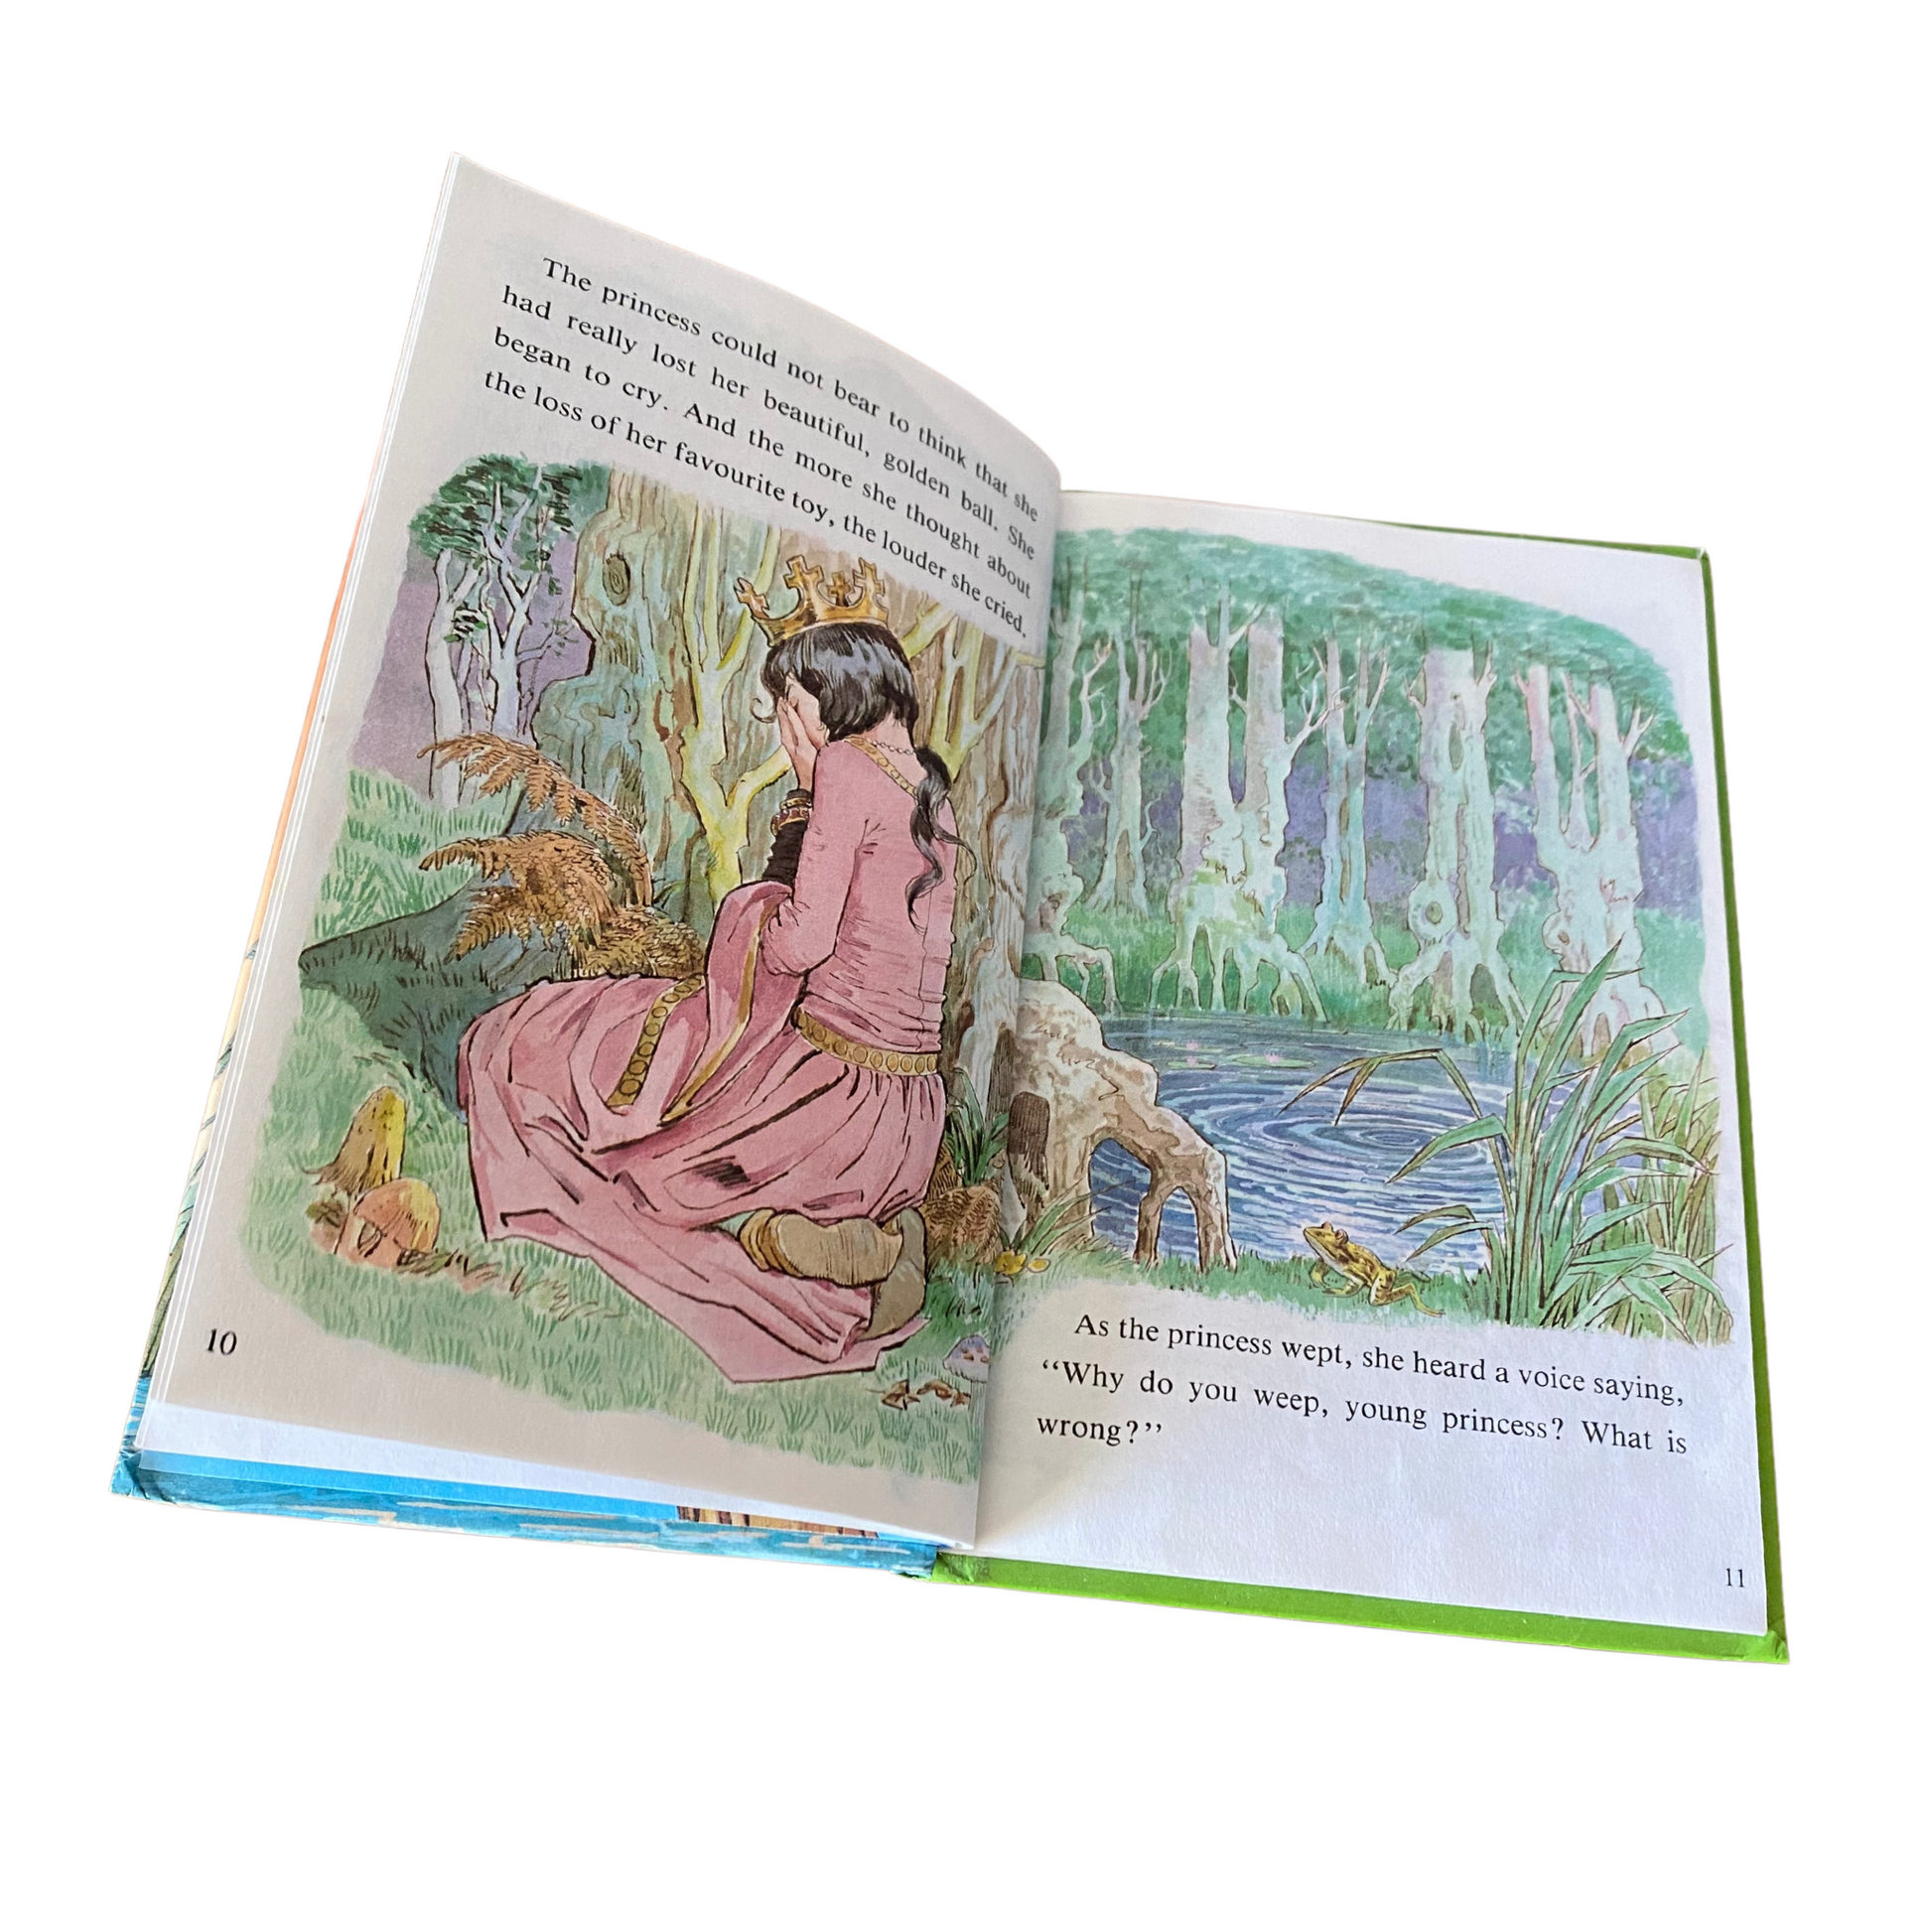 80s Ladybird book - The Princess and the Frog printed in England